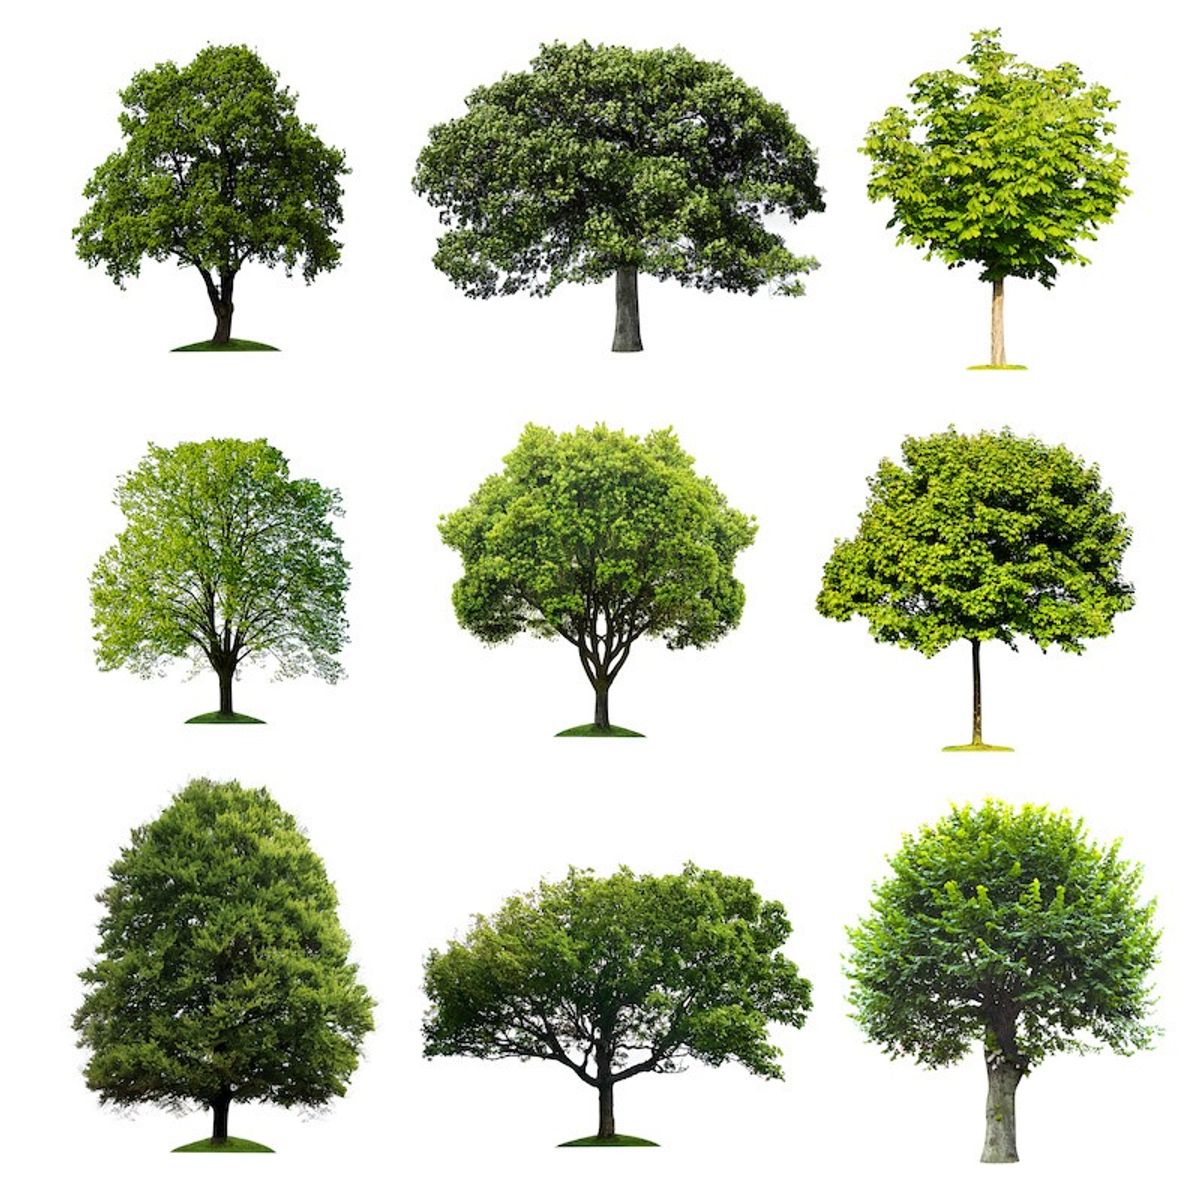 Do Trees Add Value To Your Home?